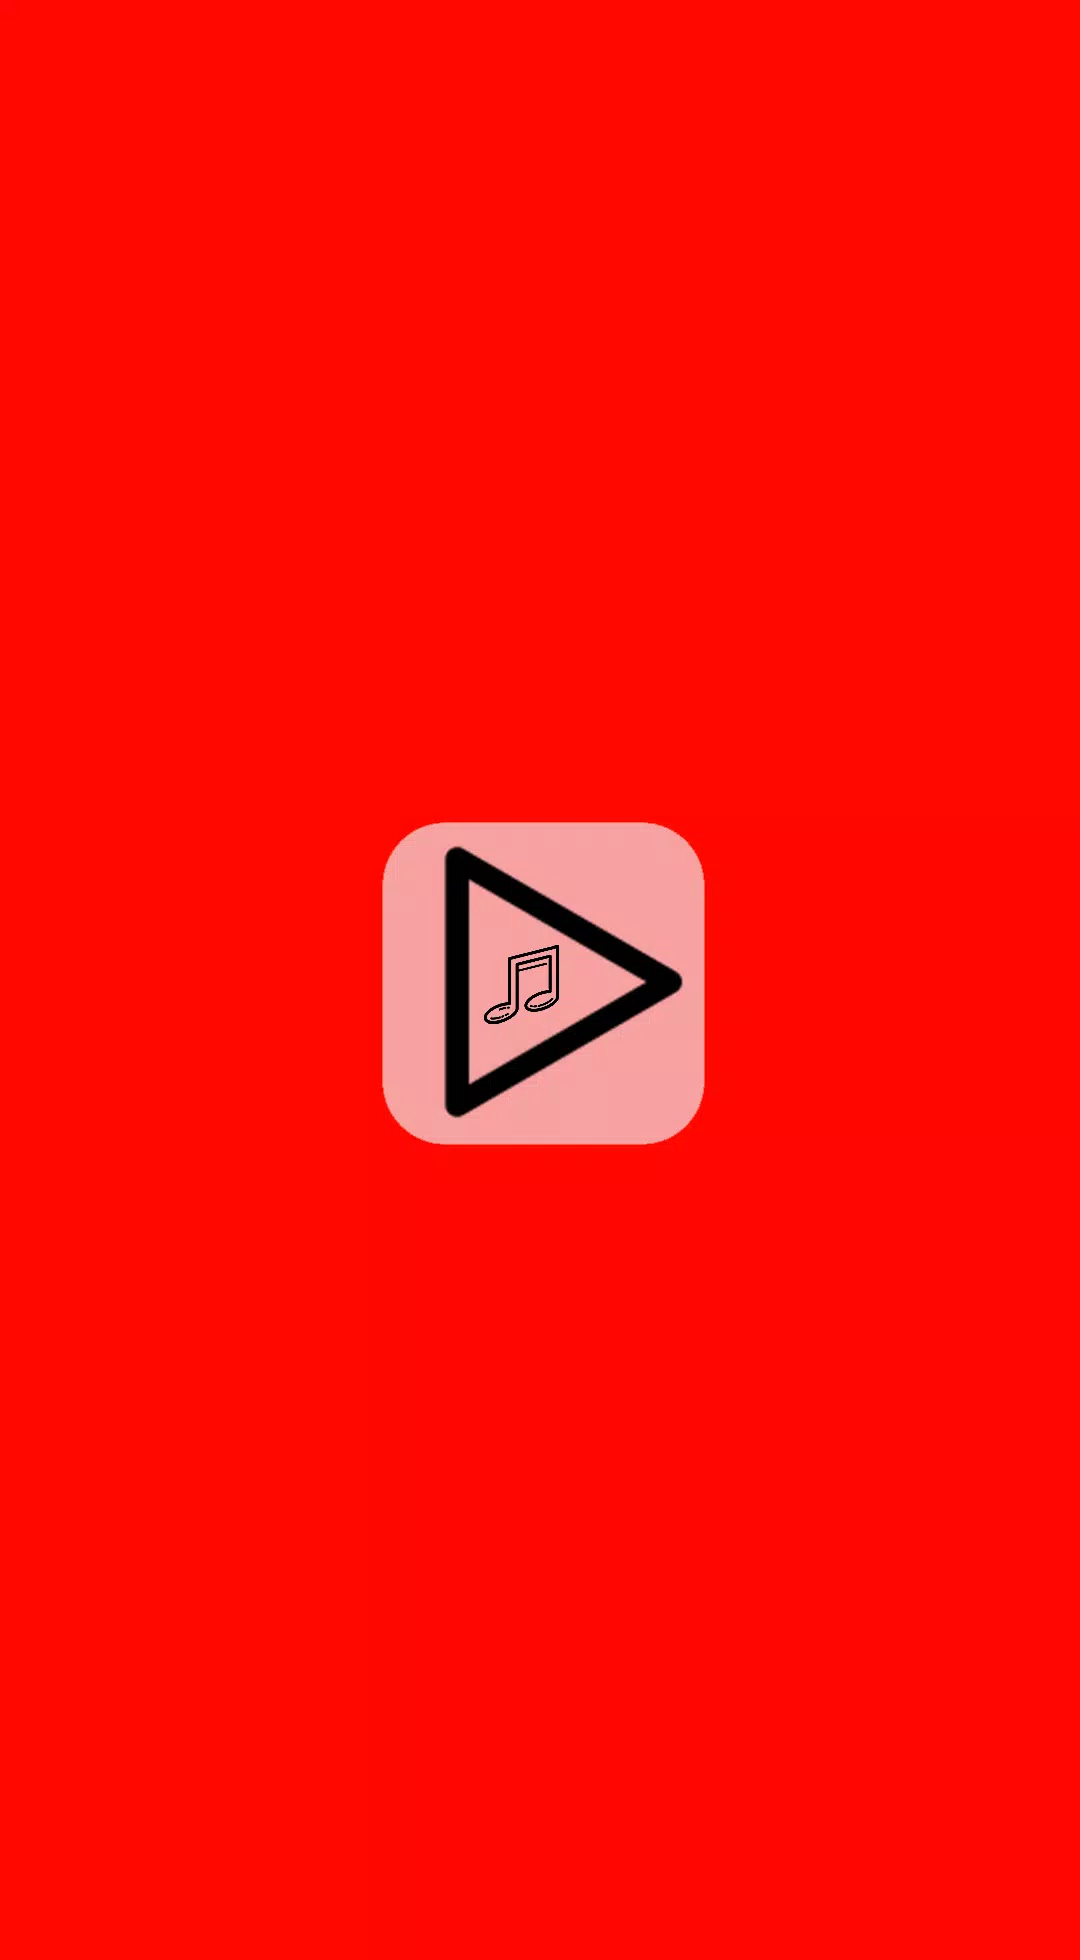 Stafaband Mp3 Download for Android - APK Download